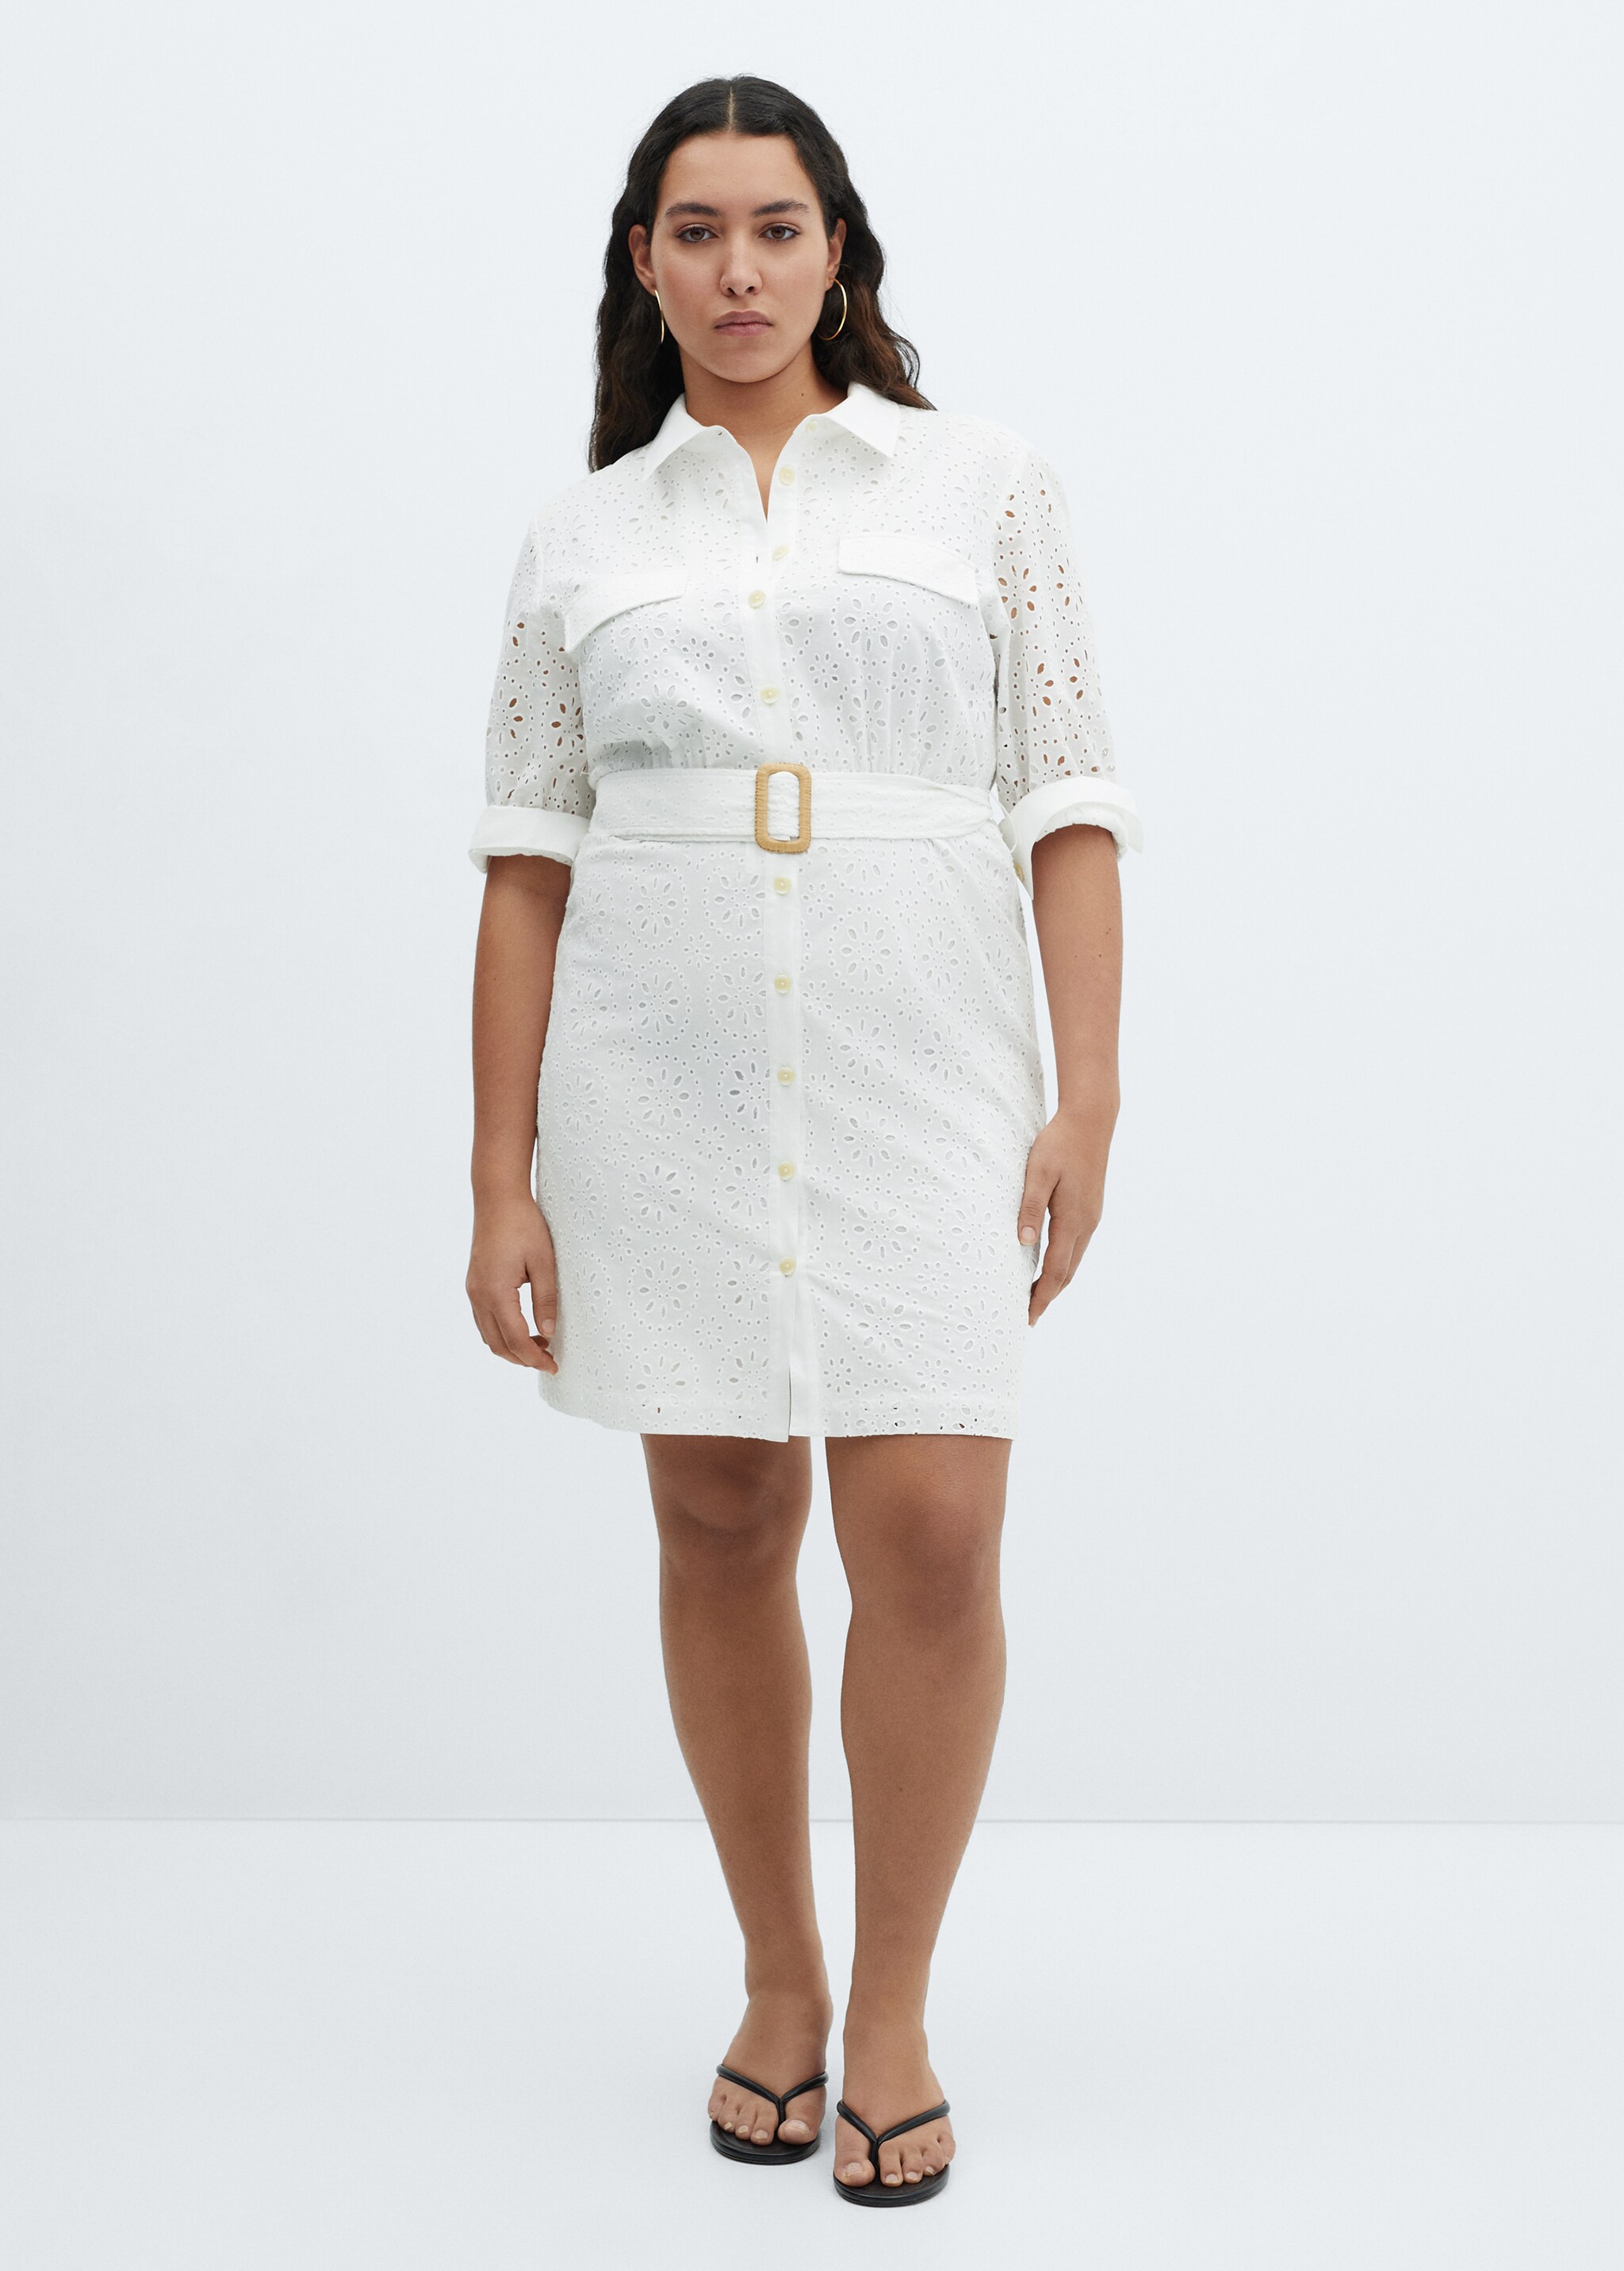 Swiss embroidered shirt dress - Details of the article 3